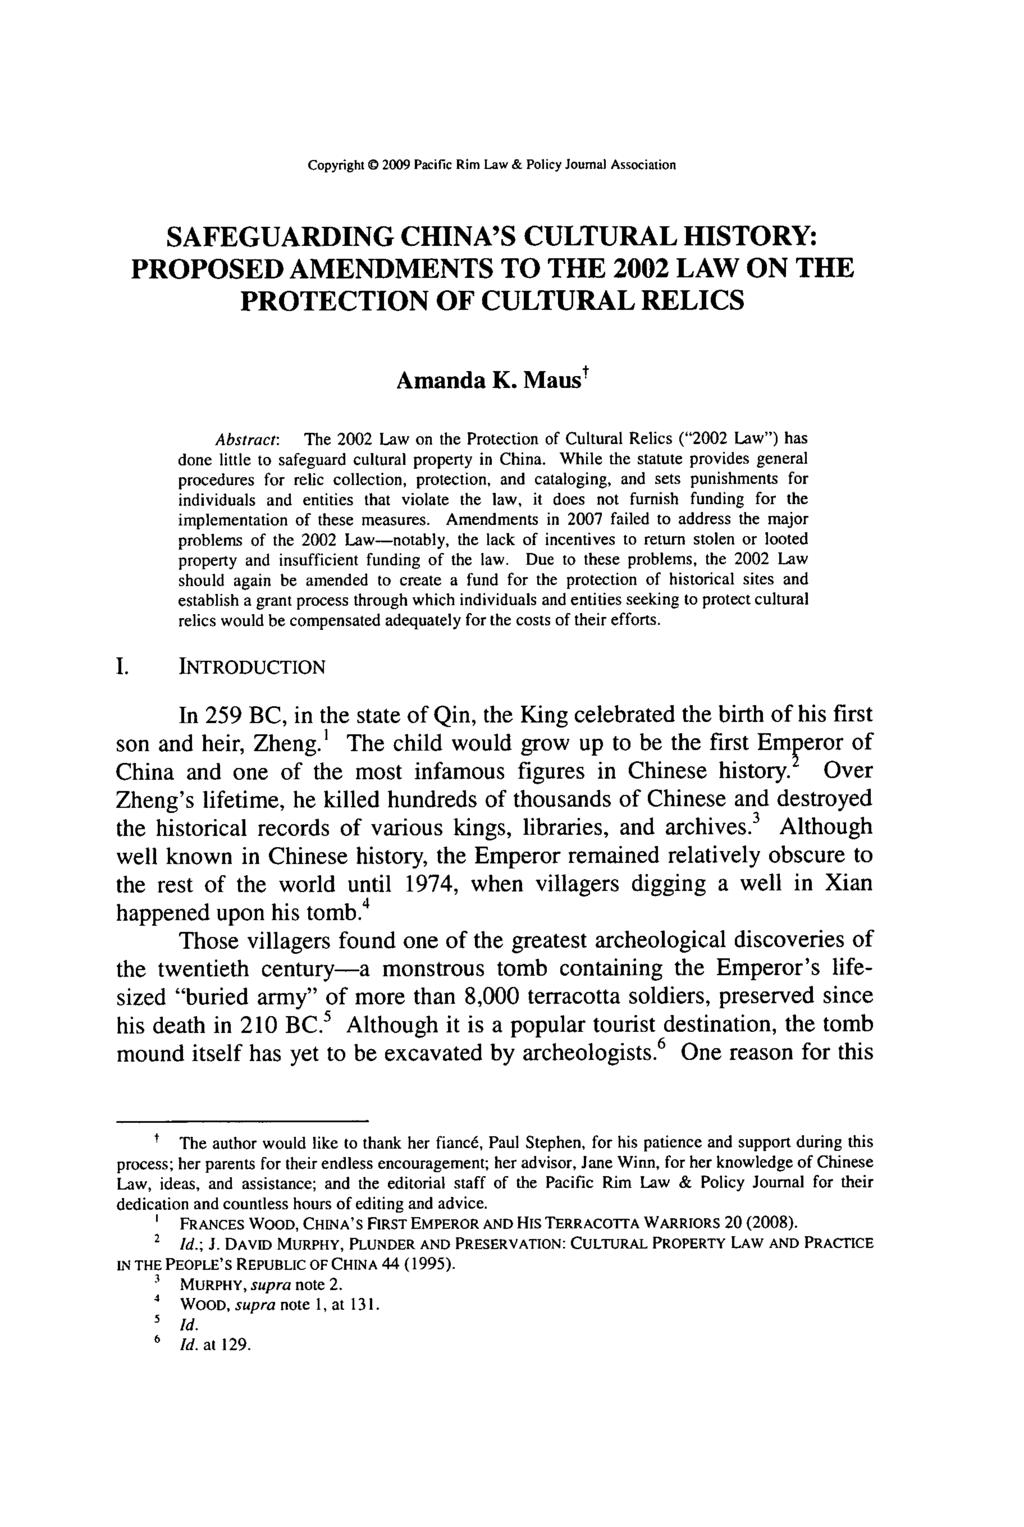 Copyright 2009 Pacific Rim Law & Policy Journal Association SAFEGUARDING CHINA'S CULTURAL HISTORY: PROPOSED AMENDMENTS TO THE 2002 LAW ON THE PROTECTION OF CULTURAL RELICS Amanda K.